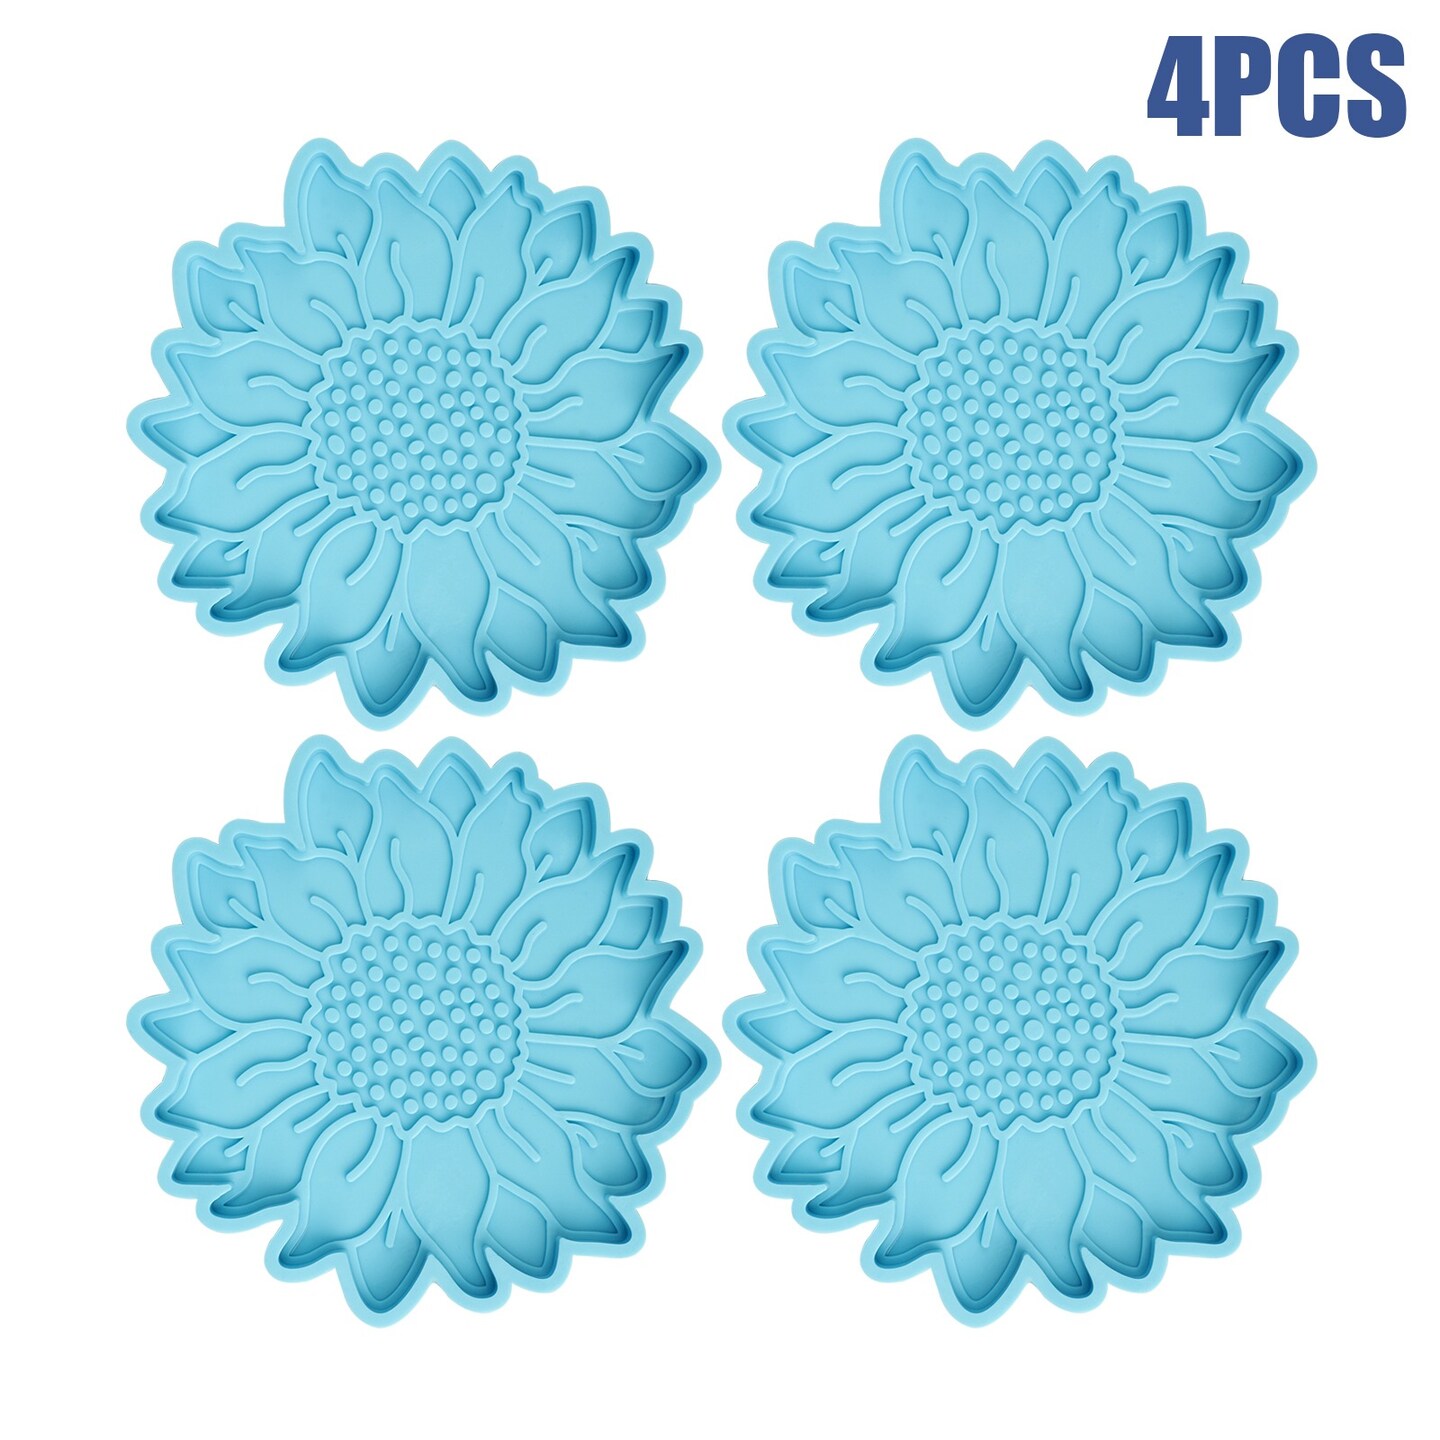 Silicone Sunflower Coaster Resin Mold Epoxy Casting Making Mould DIY Craft Tool